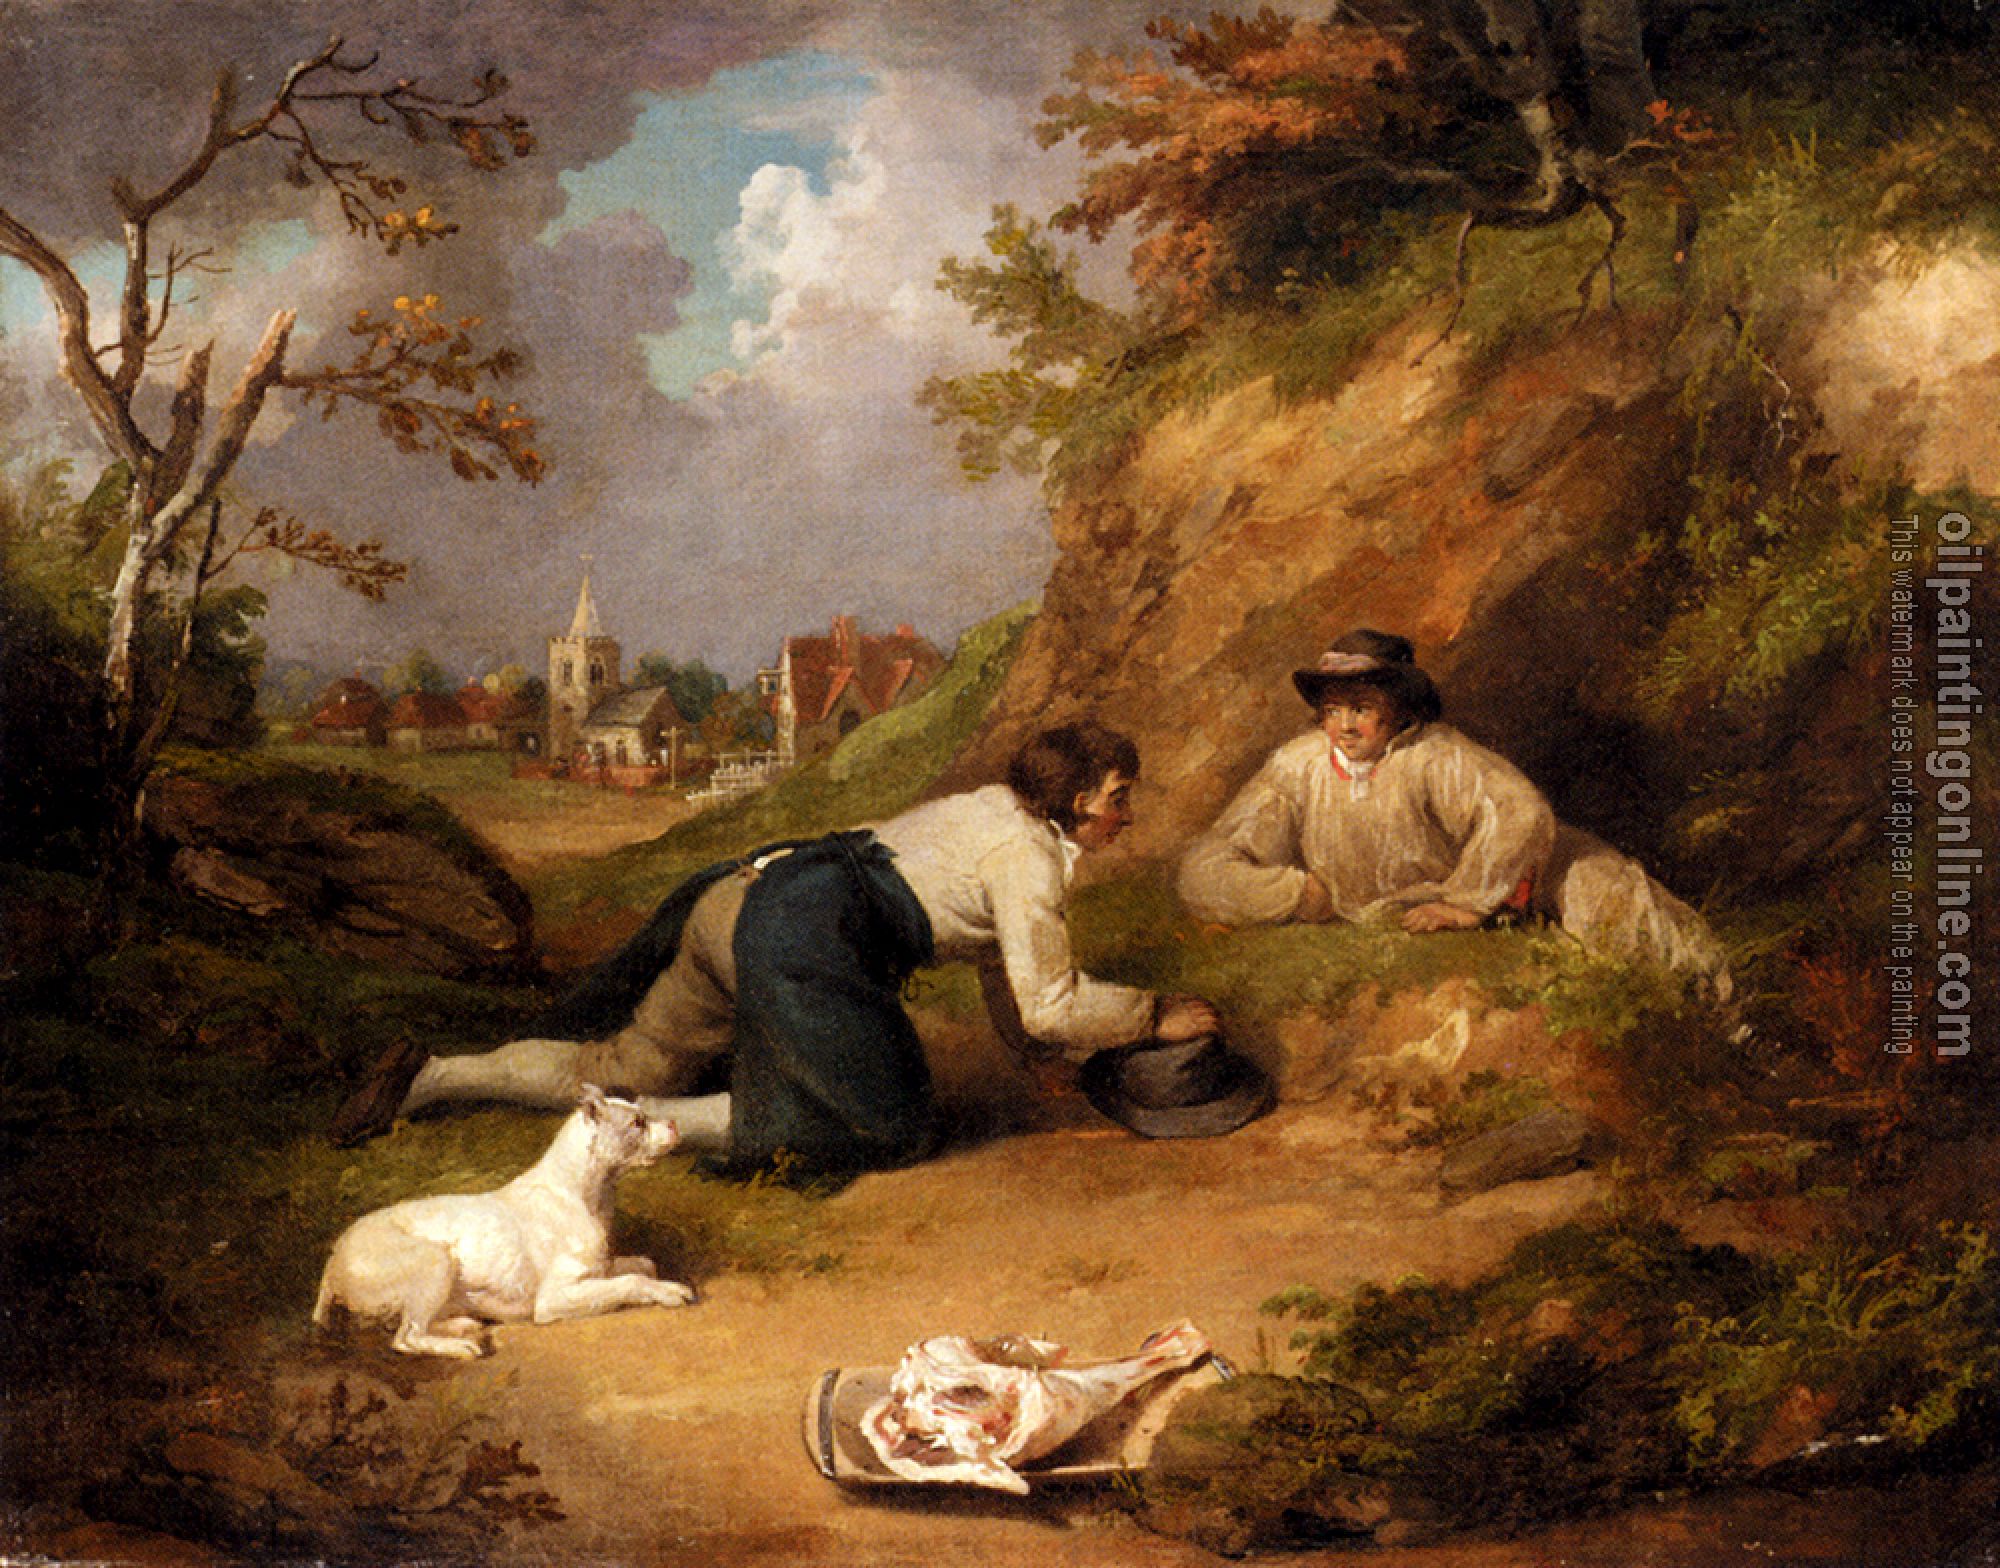 George Morland - Two Men Hunting Rabbits With Their Dog A Village Beyond